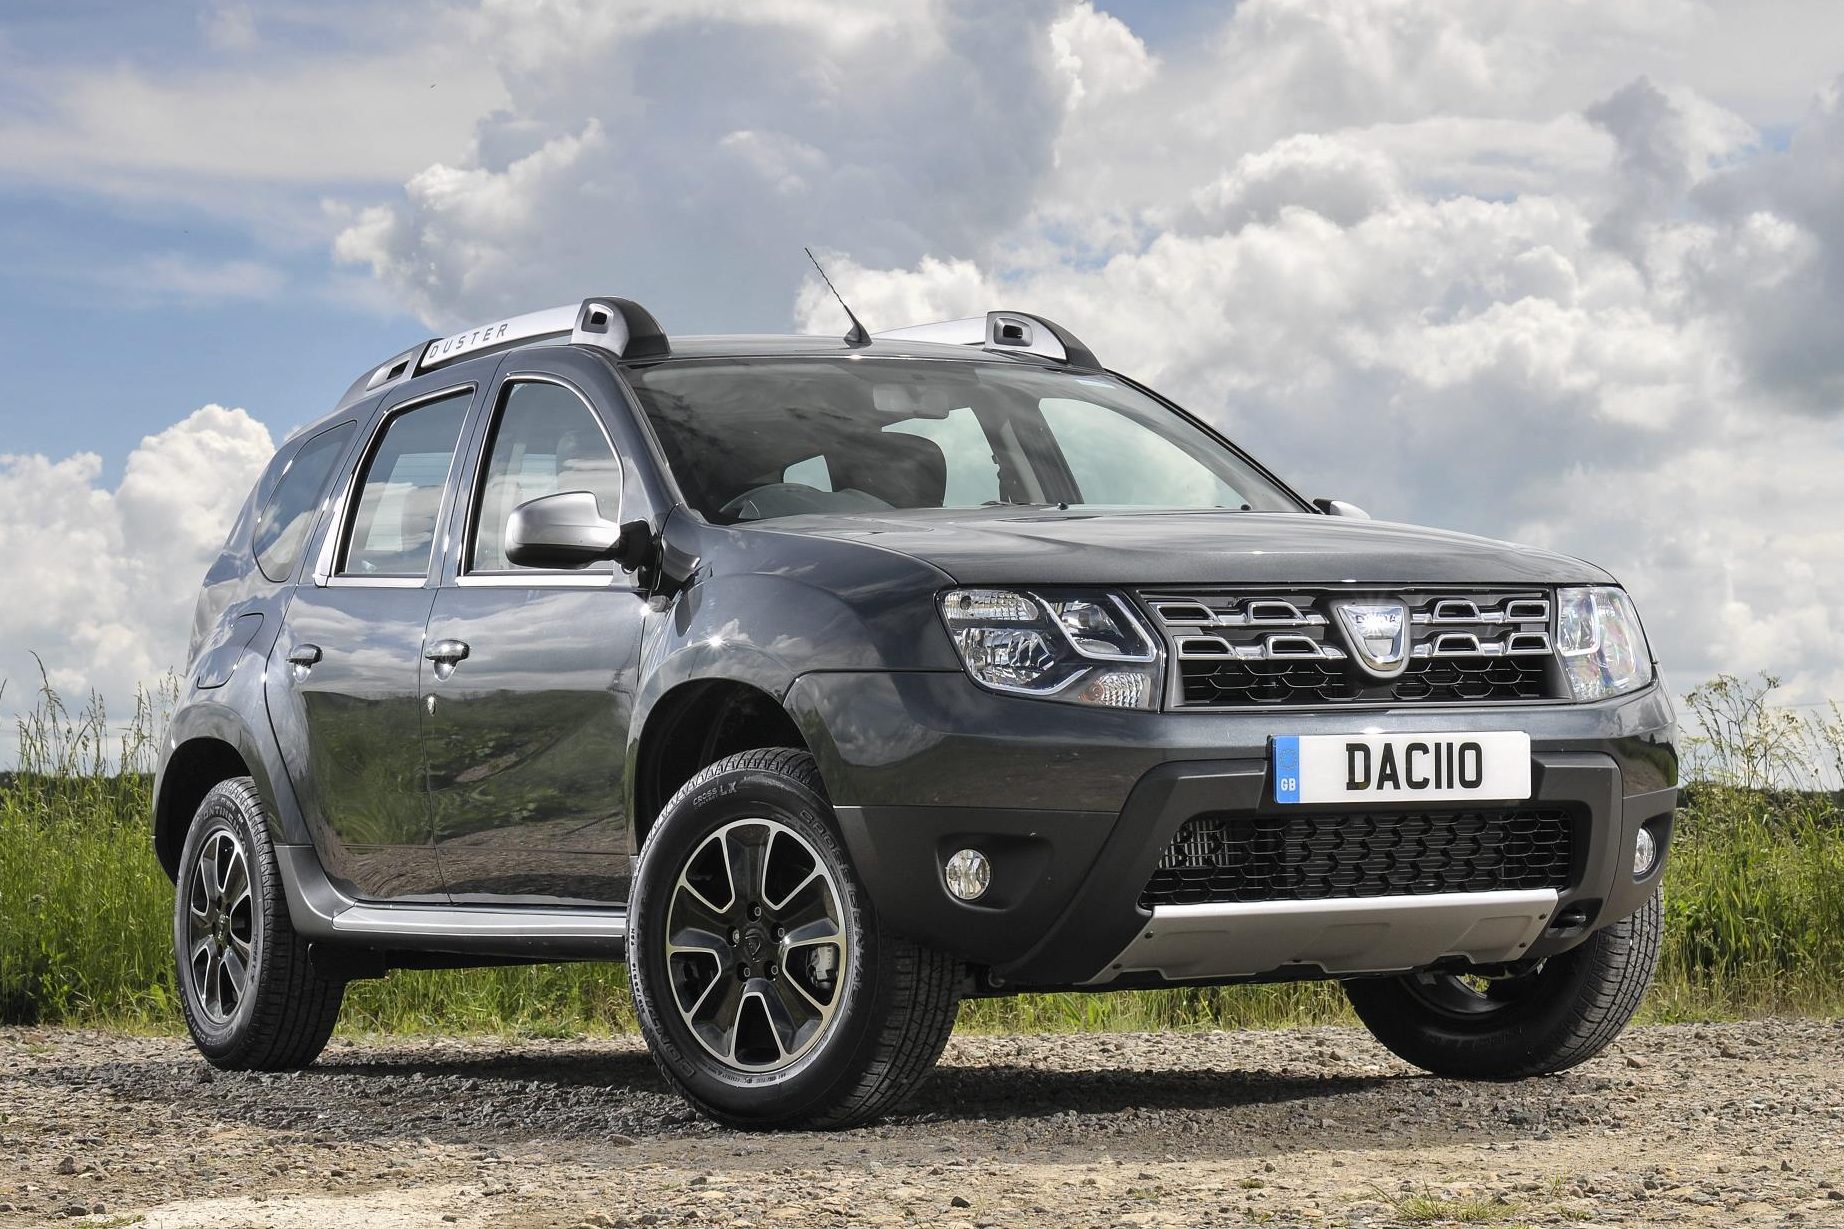 The Dom Joly review: 2016 Dacia Duster